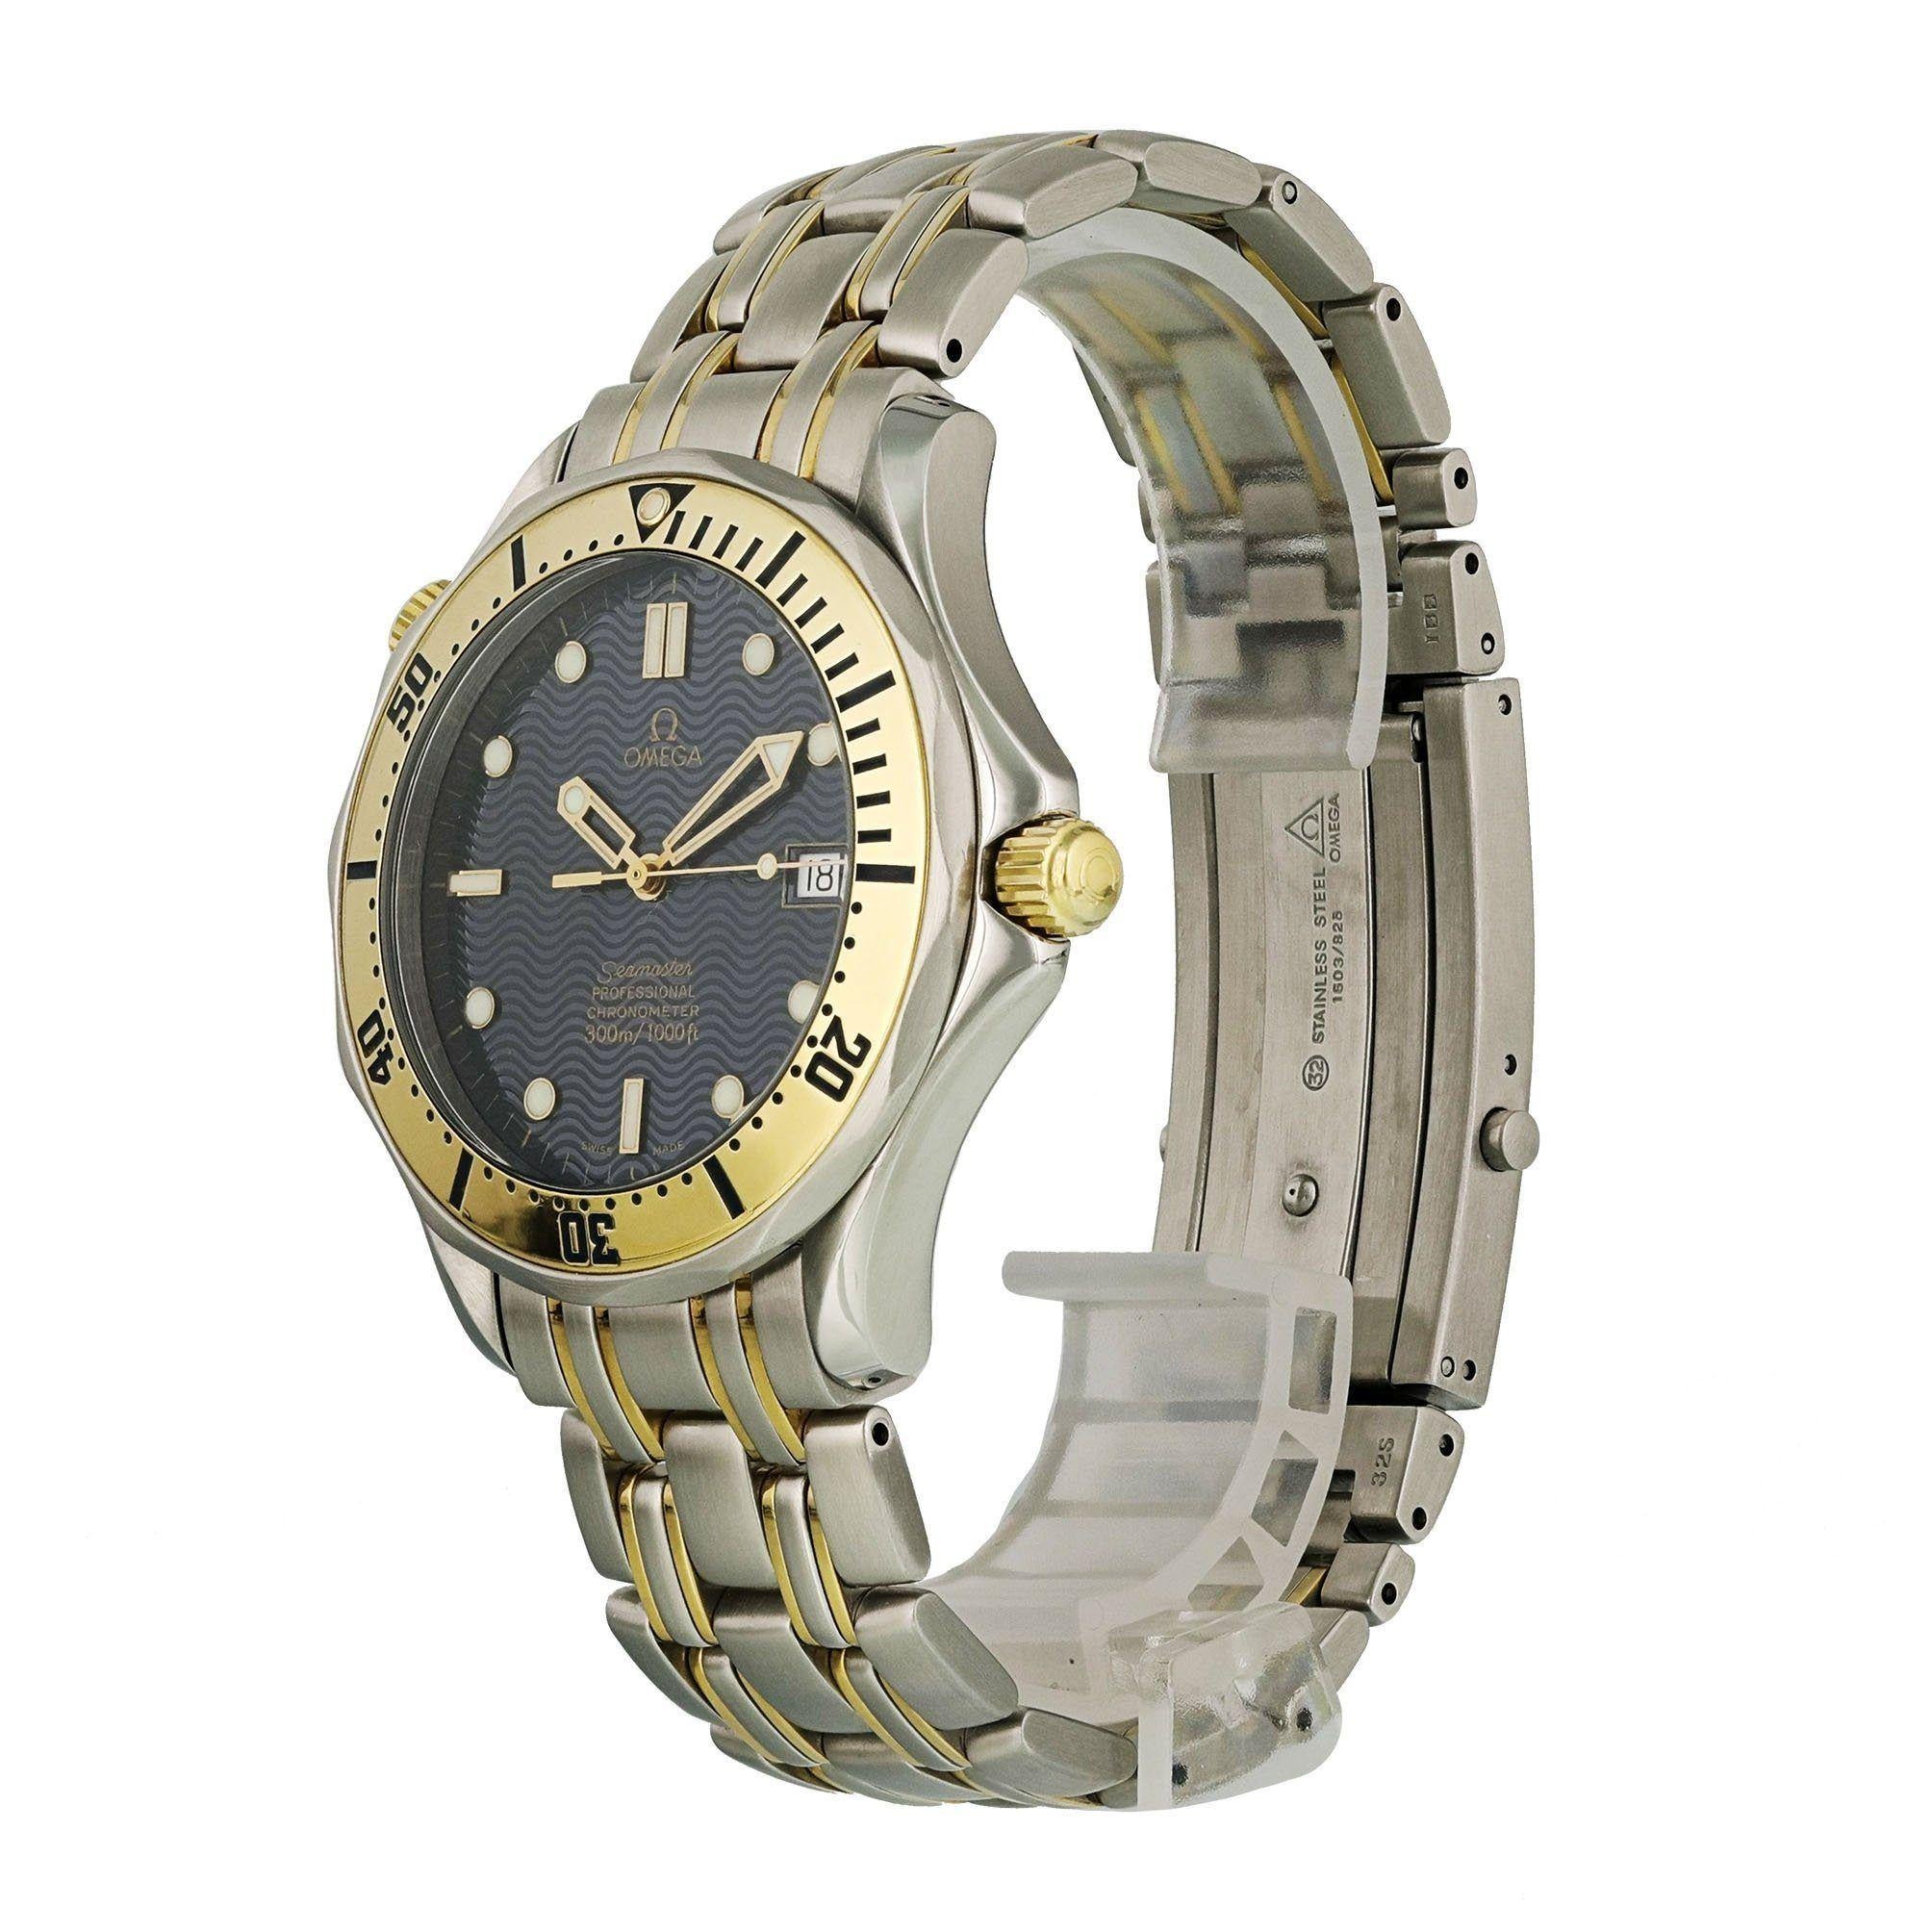 Omega Seamaster Professional 2332.80.00 Men Watch. 
41.5mm Stainless Steel case. 
Yellow Gold Unidirectional bezel. 
Blue dial with Luminous gold hands and dot hour markers. 
Minute markers on the outer dial. 
Date display at the 3 o'clock position.